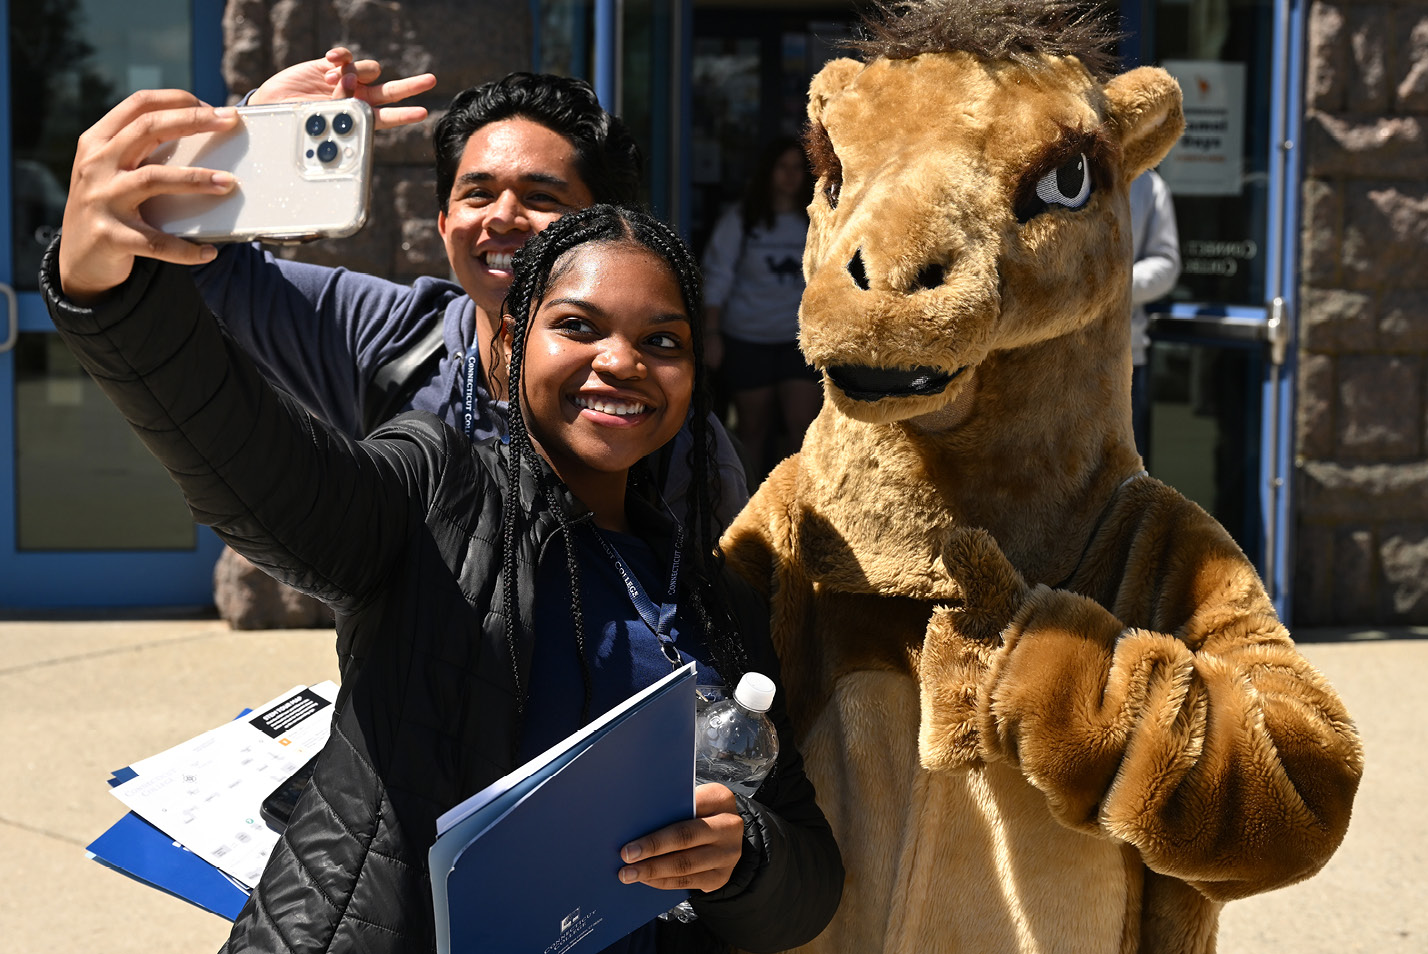 Accepted students take selfies with the mascot on Camel Days in April.